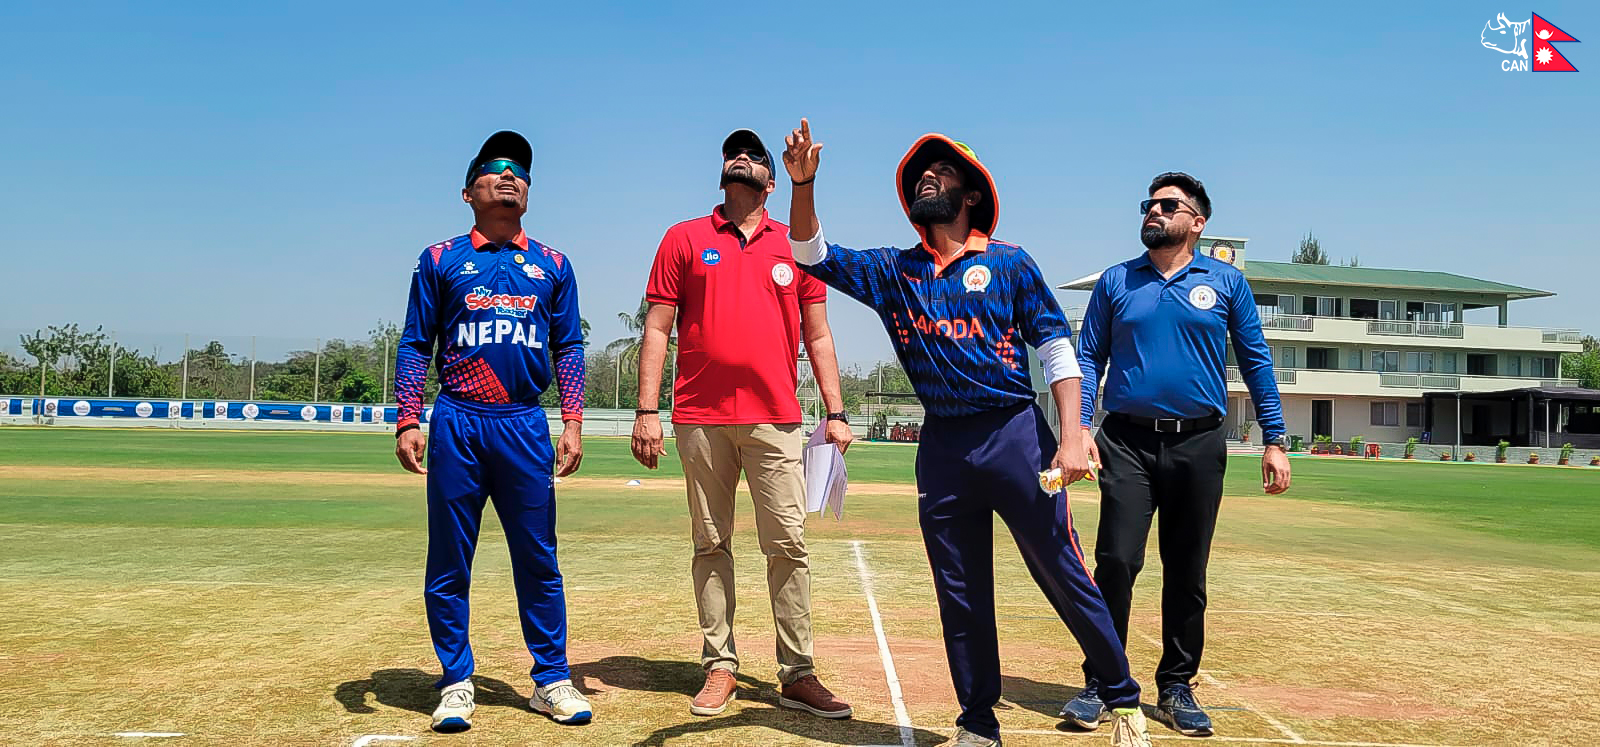 Nepal lost the toss, batting first